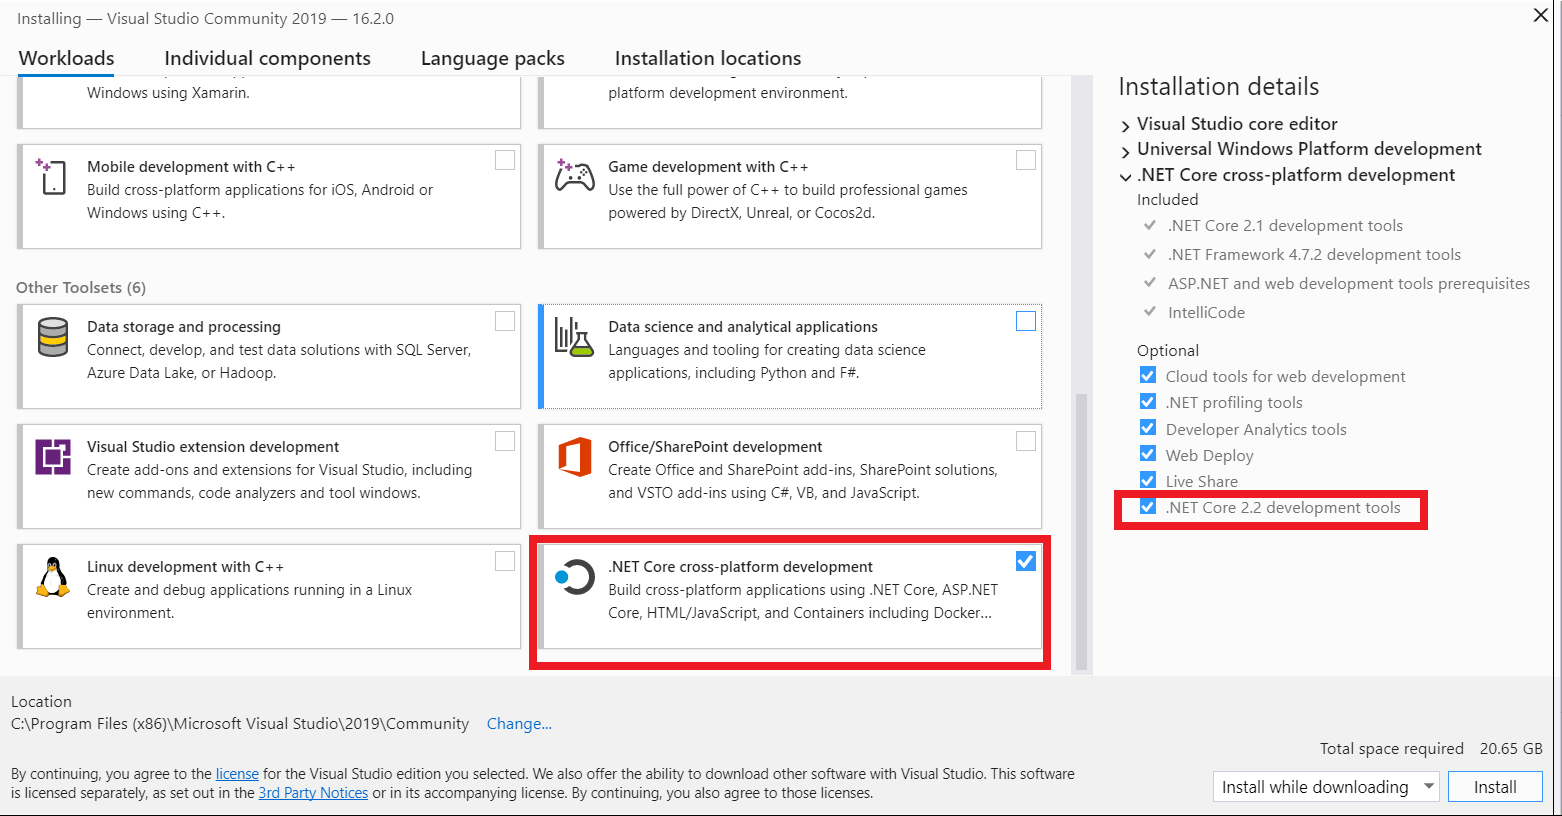 Screenshot that shows the Visual Studio 2019 Workloads page with with .NET Core cross platform development selected and installation details page open.